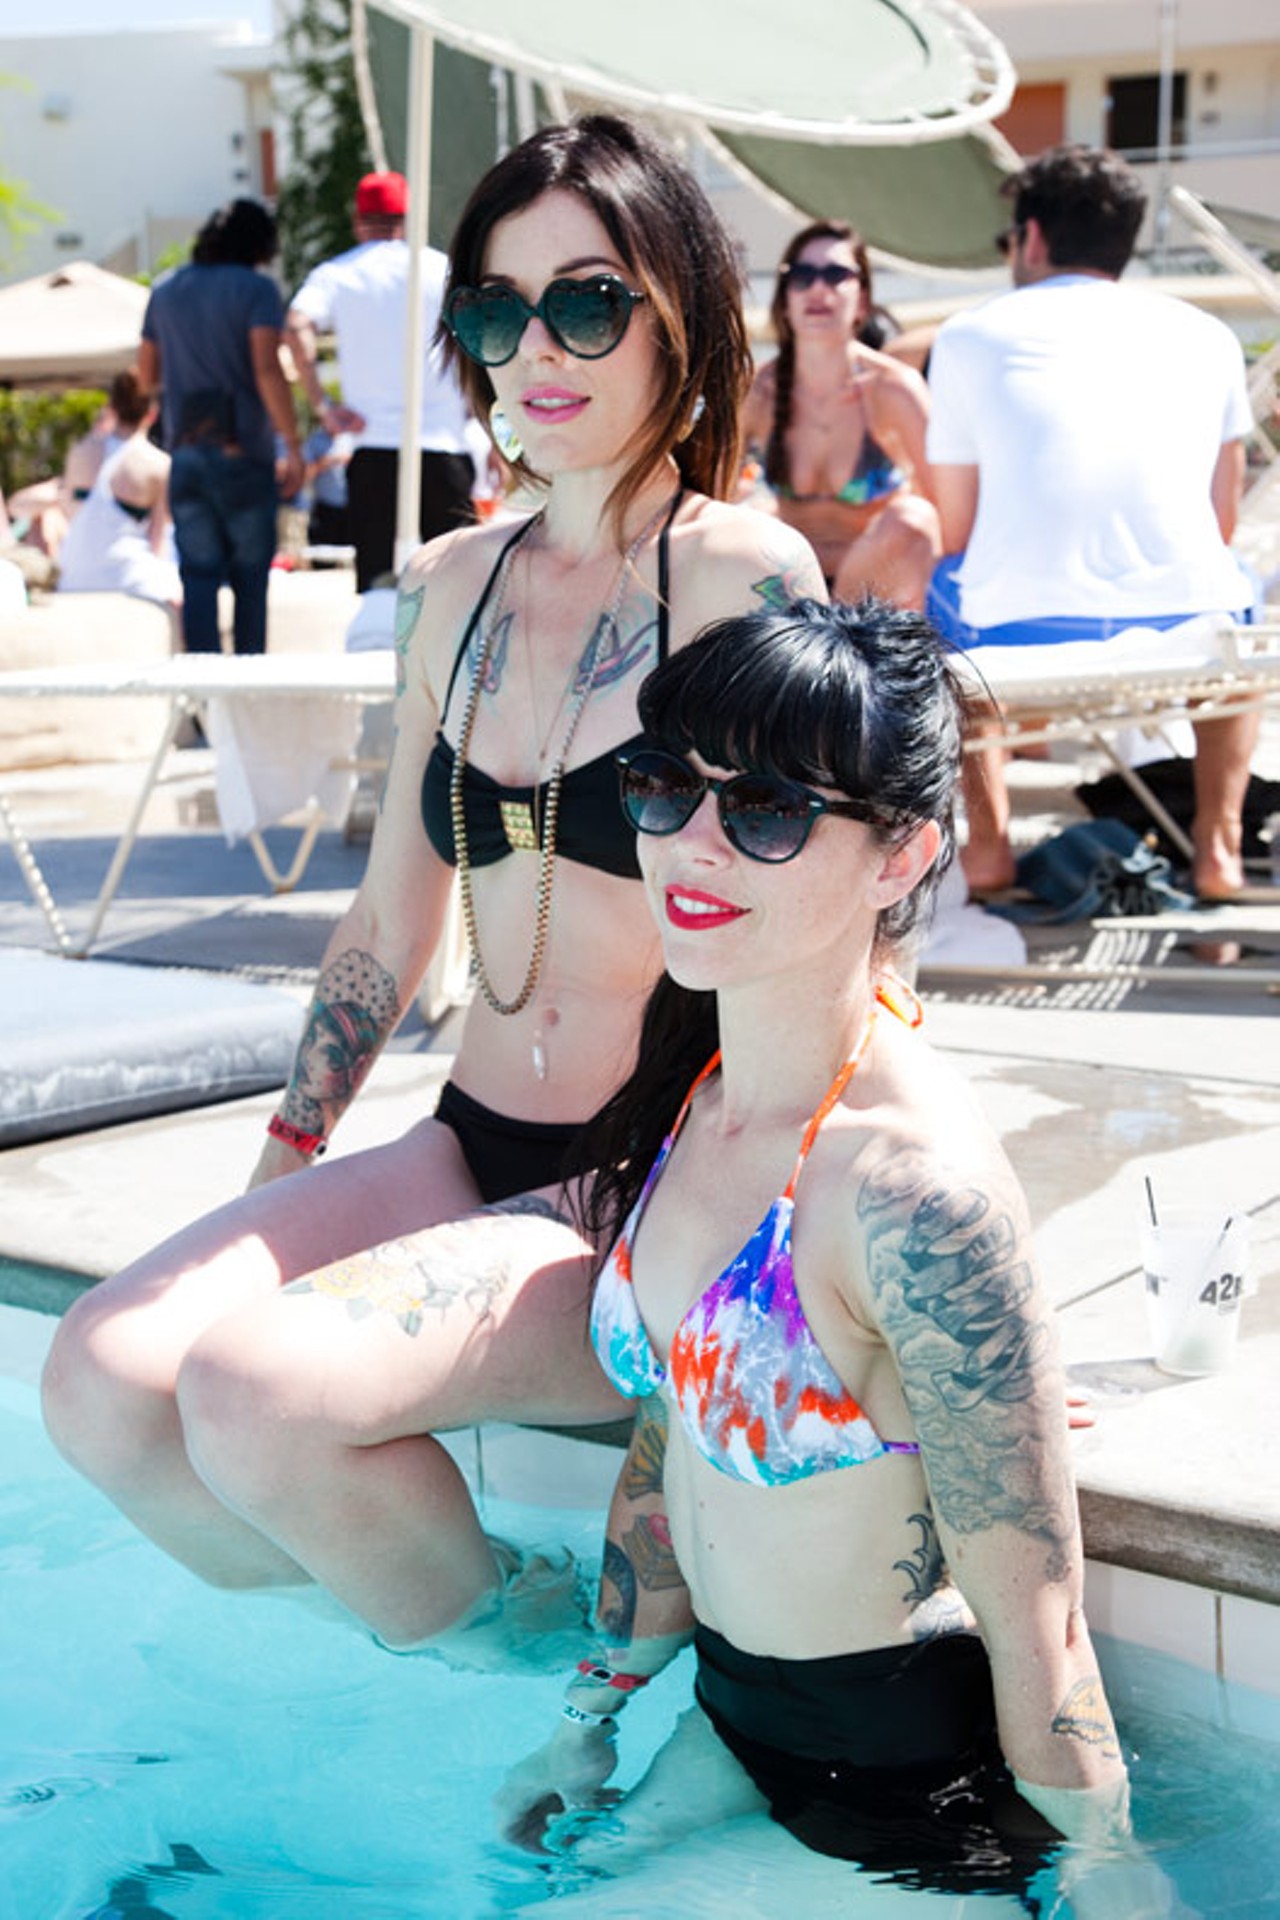 Coachella 2012: Staying Cool at Sunday's Pool Parties